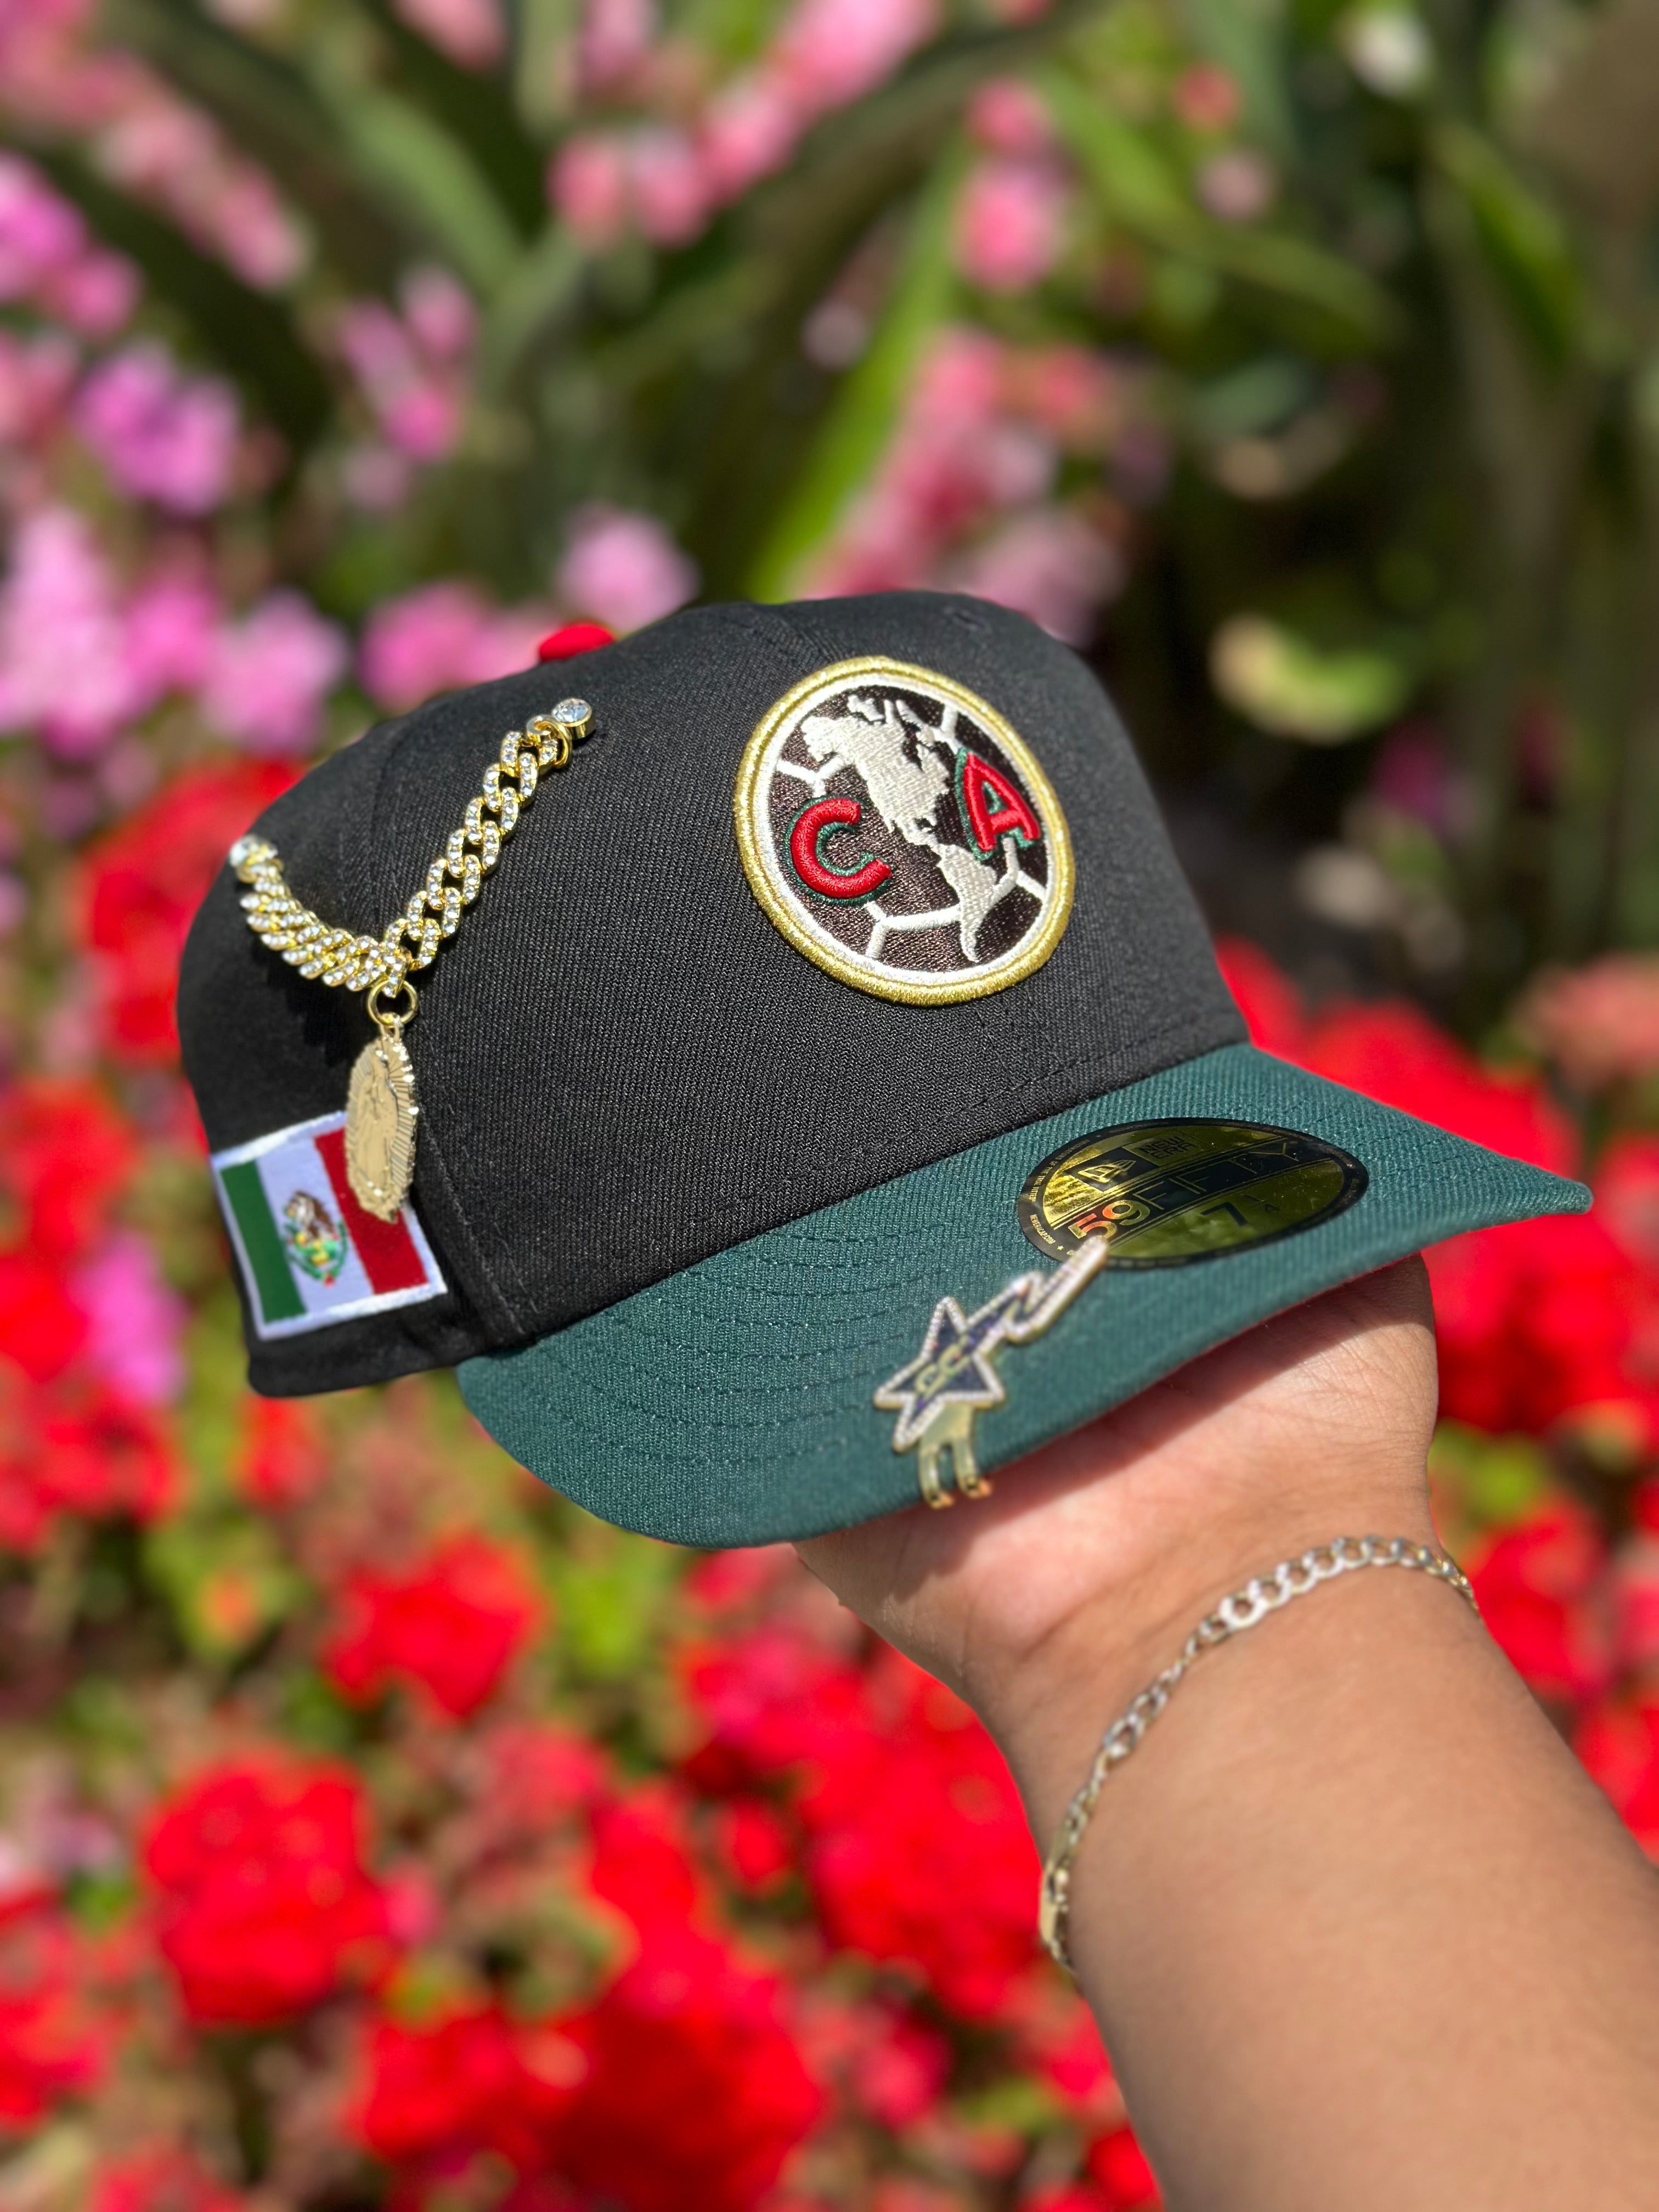 NEW ERA EXCLUSIVE 59FIFTY BLACK/FOREST GREEN "CLUB AMERICA" W/ MEXICO FLAG SIDE PATCH